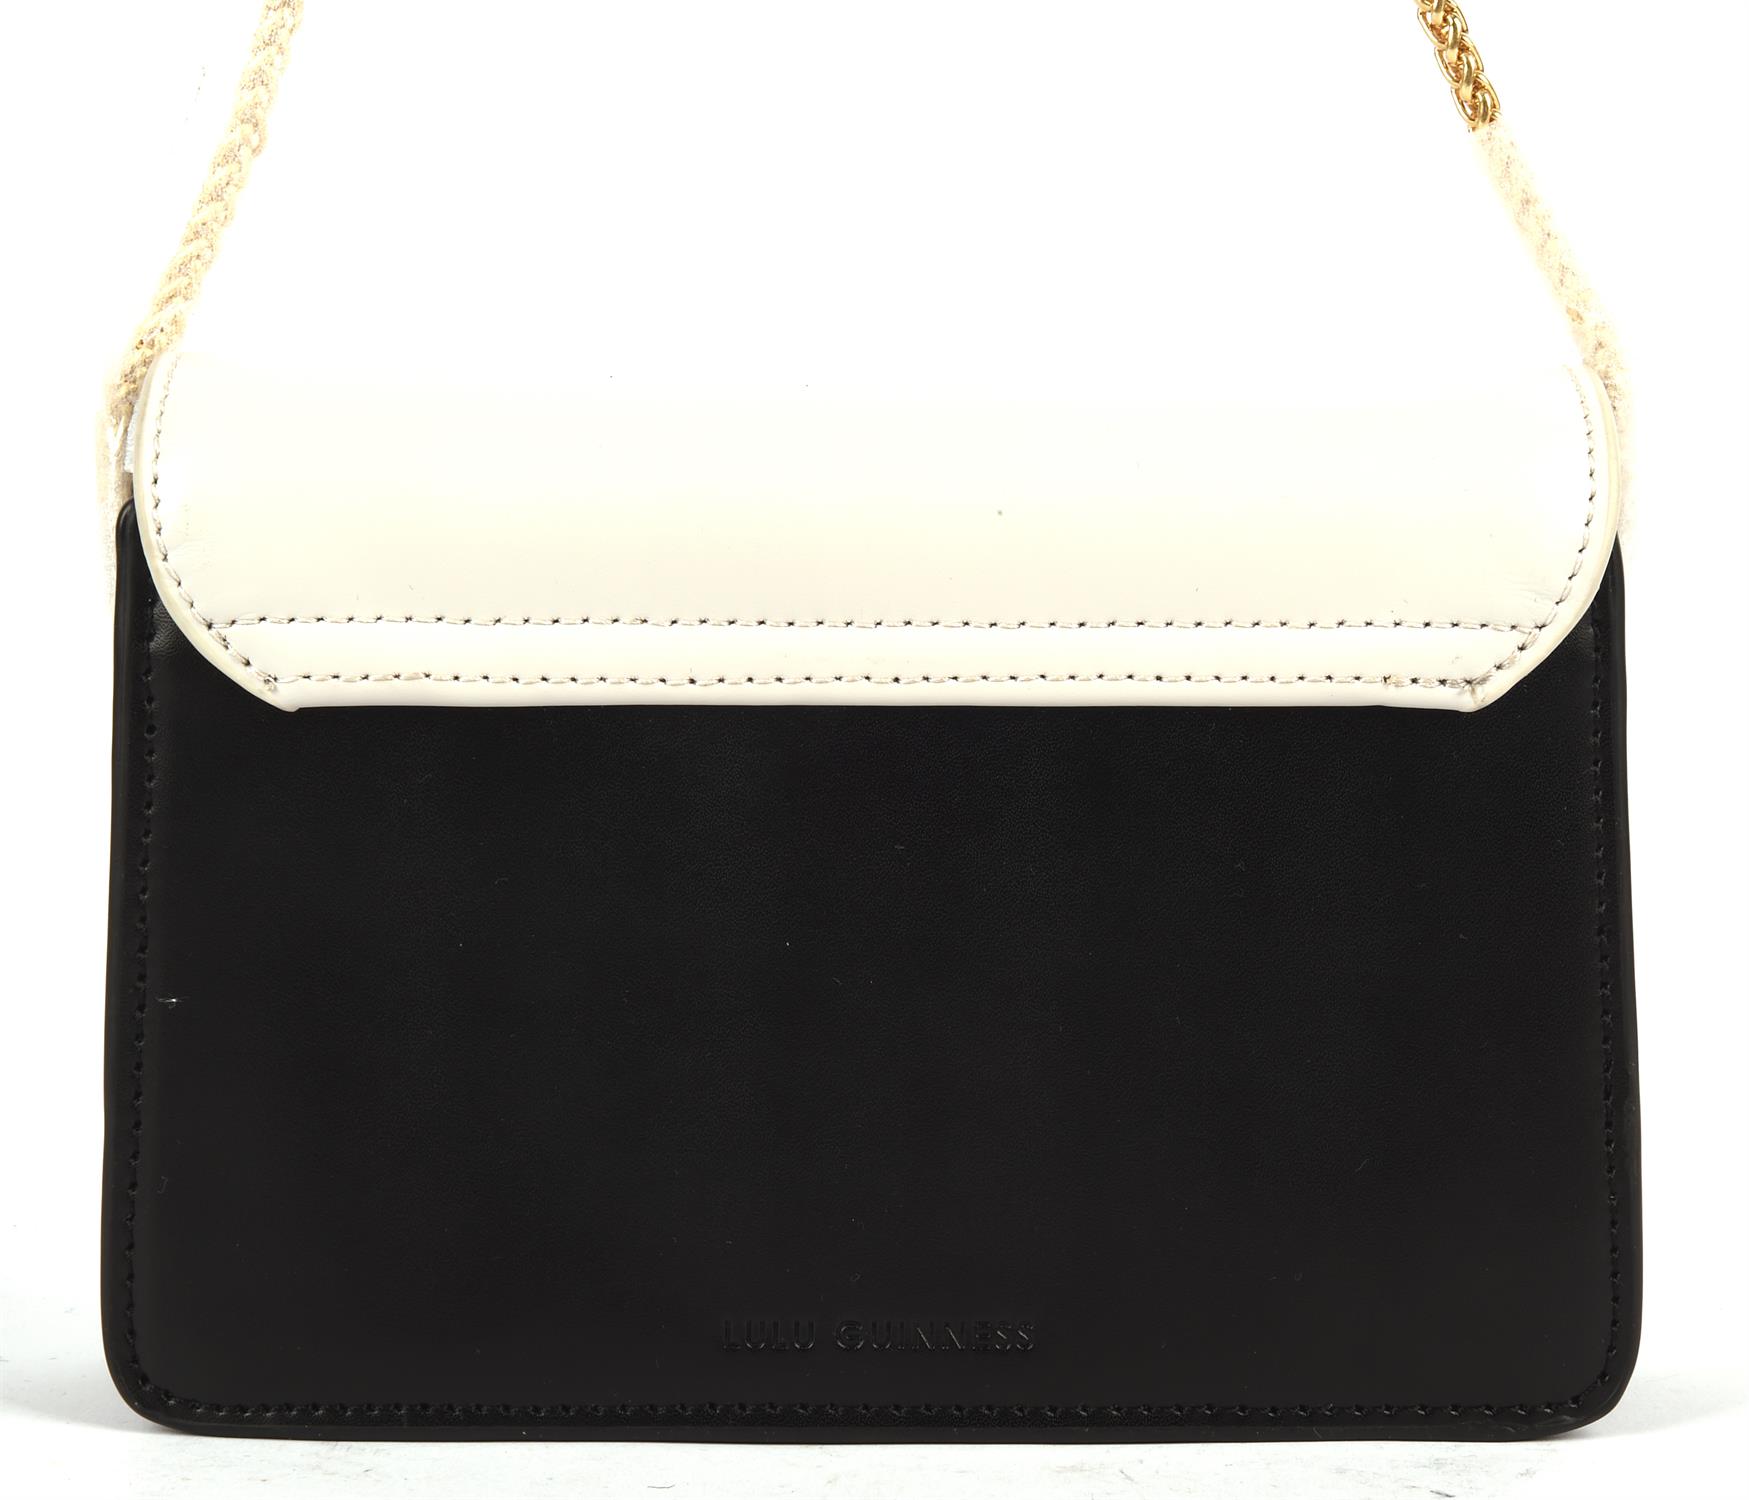 LULU GUINNESS small black and dove-grey leather small crossbody handbag with long gold chain, - Image 6 of 7